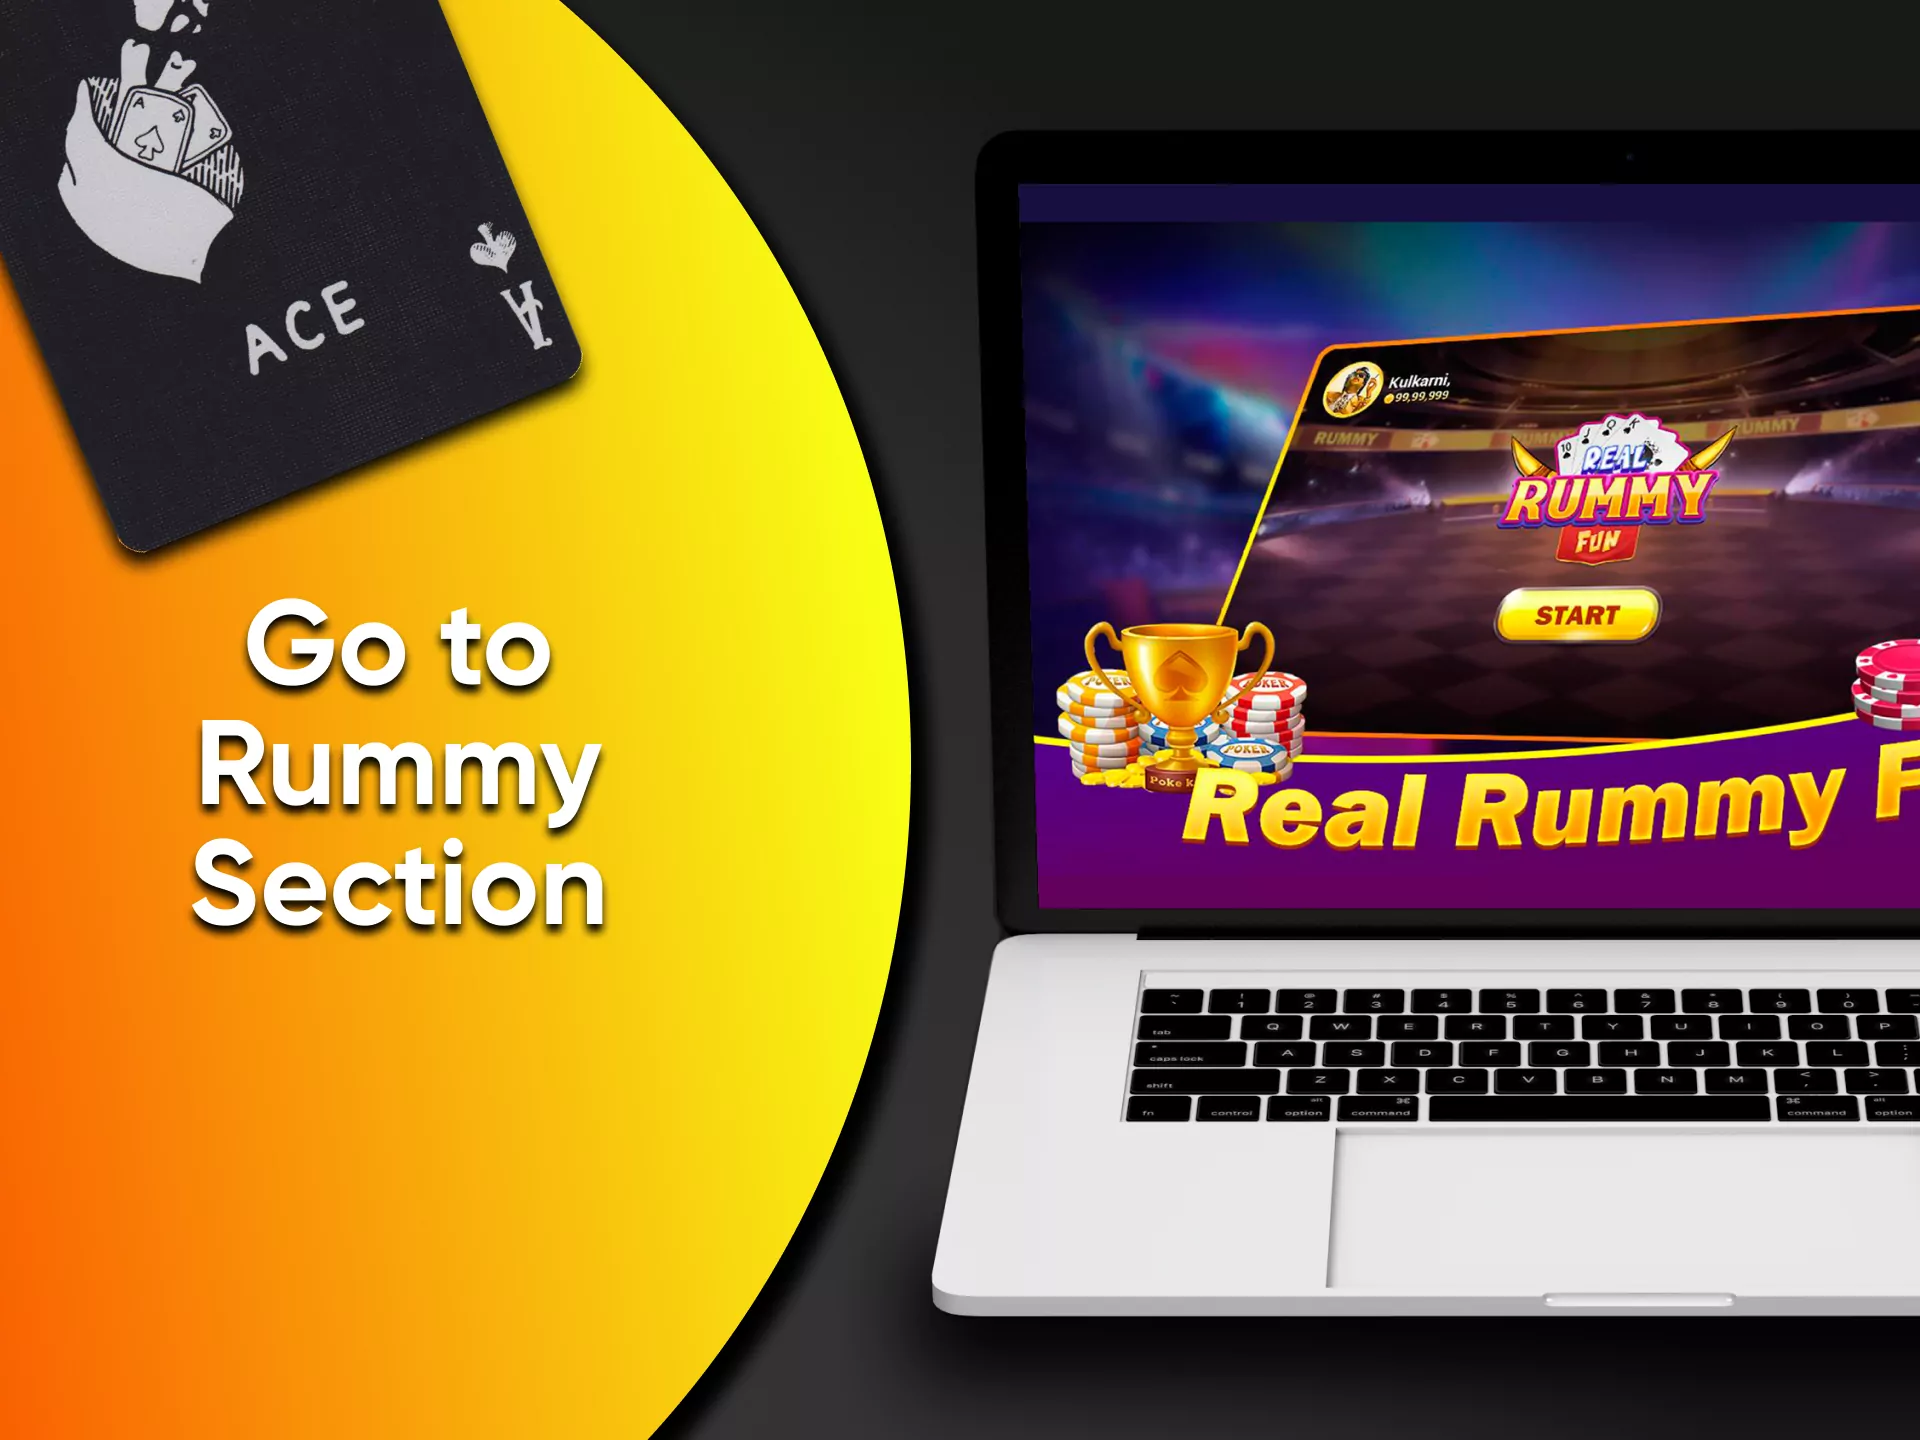 Choose the section you want to play in Rummy.